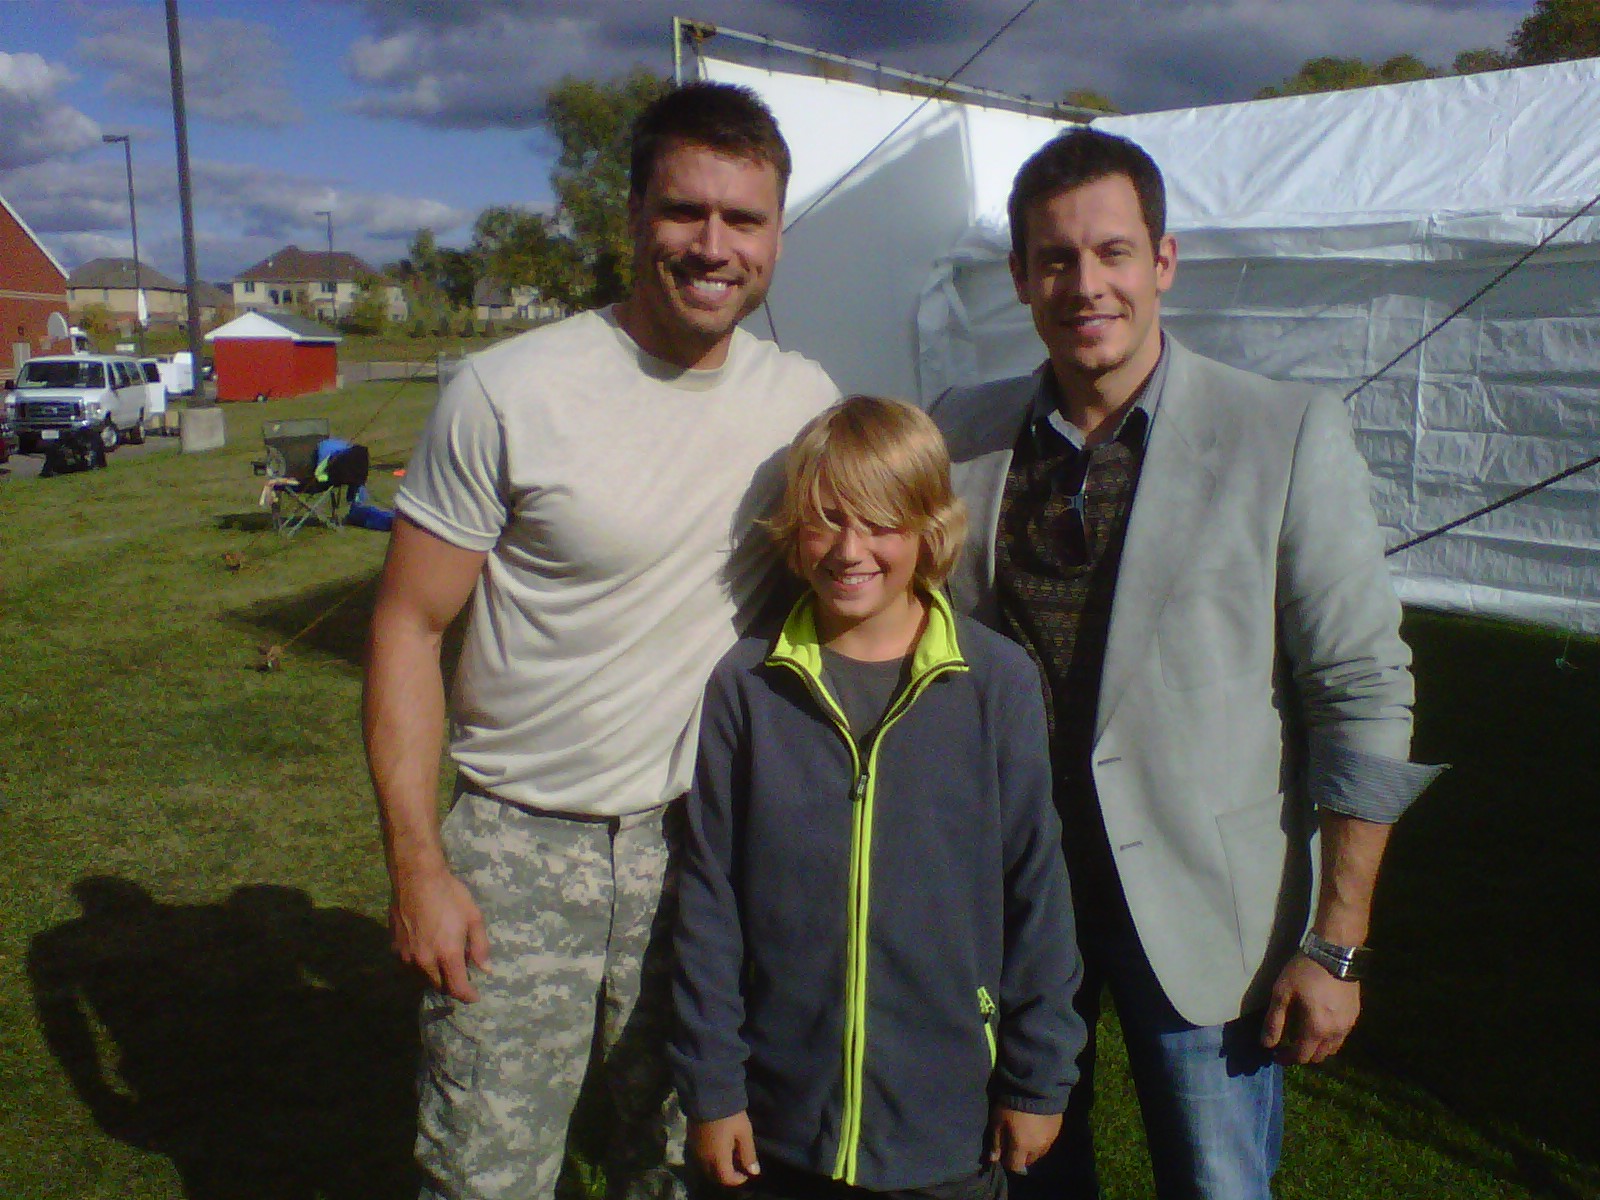 On the set of Golden Shoes with Joshua Morrow (left) and Franco Pulice (right)